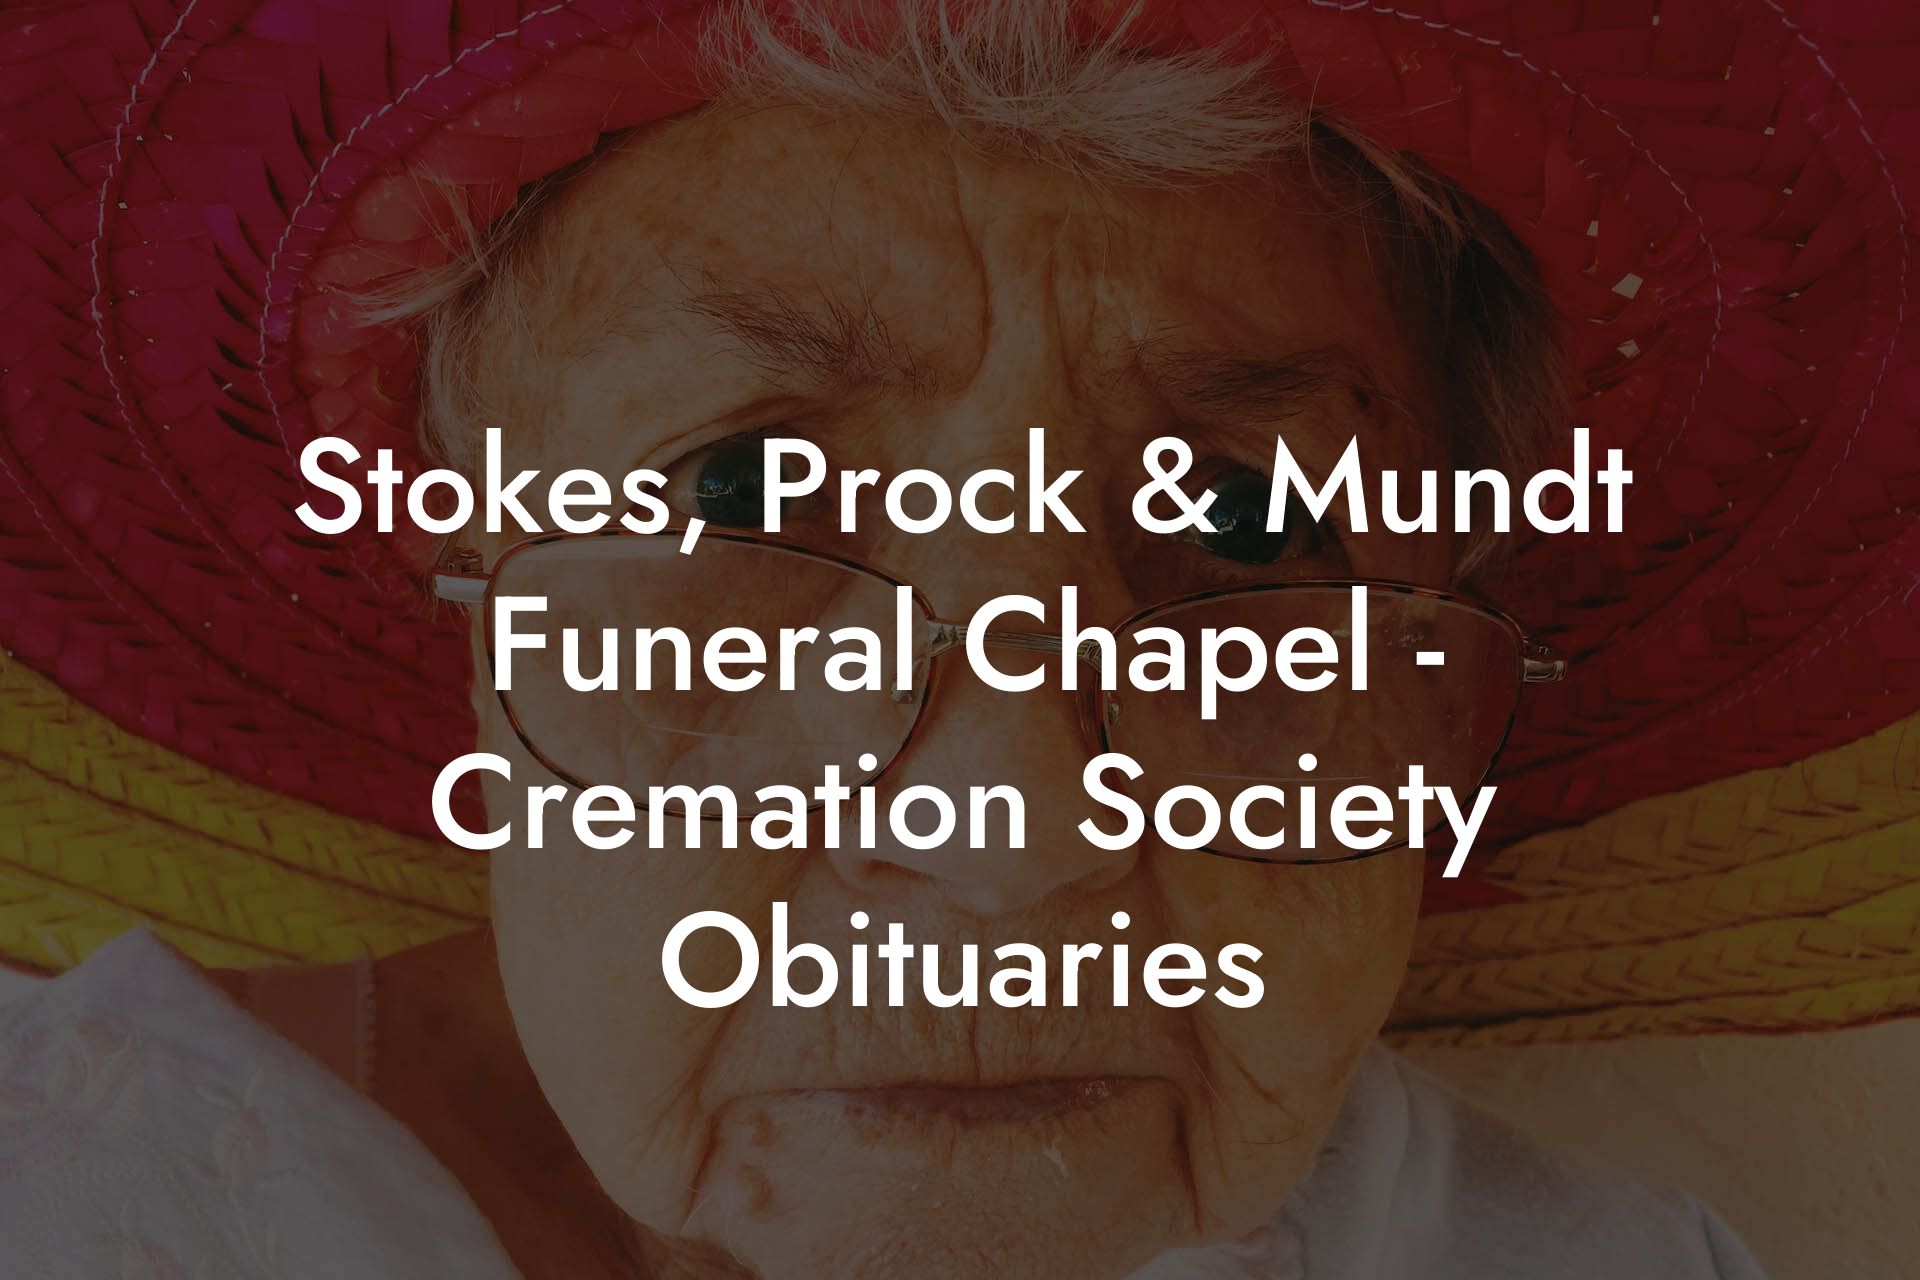 Stokes, Prock & Mundt Funeral Chapel - Cremation Society Obituaries